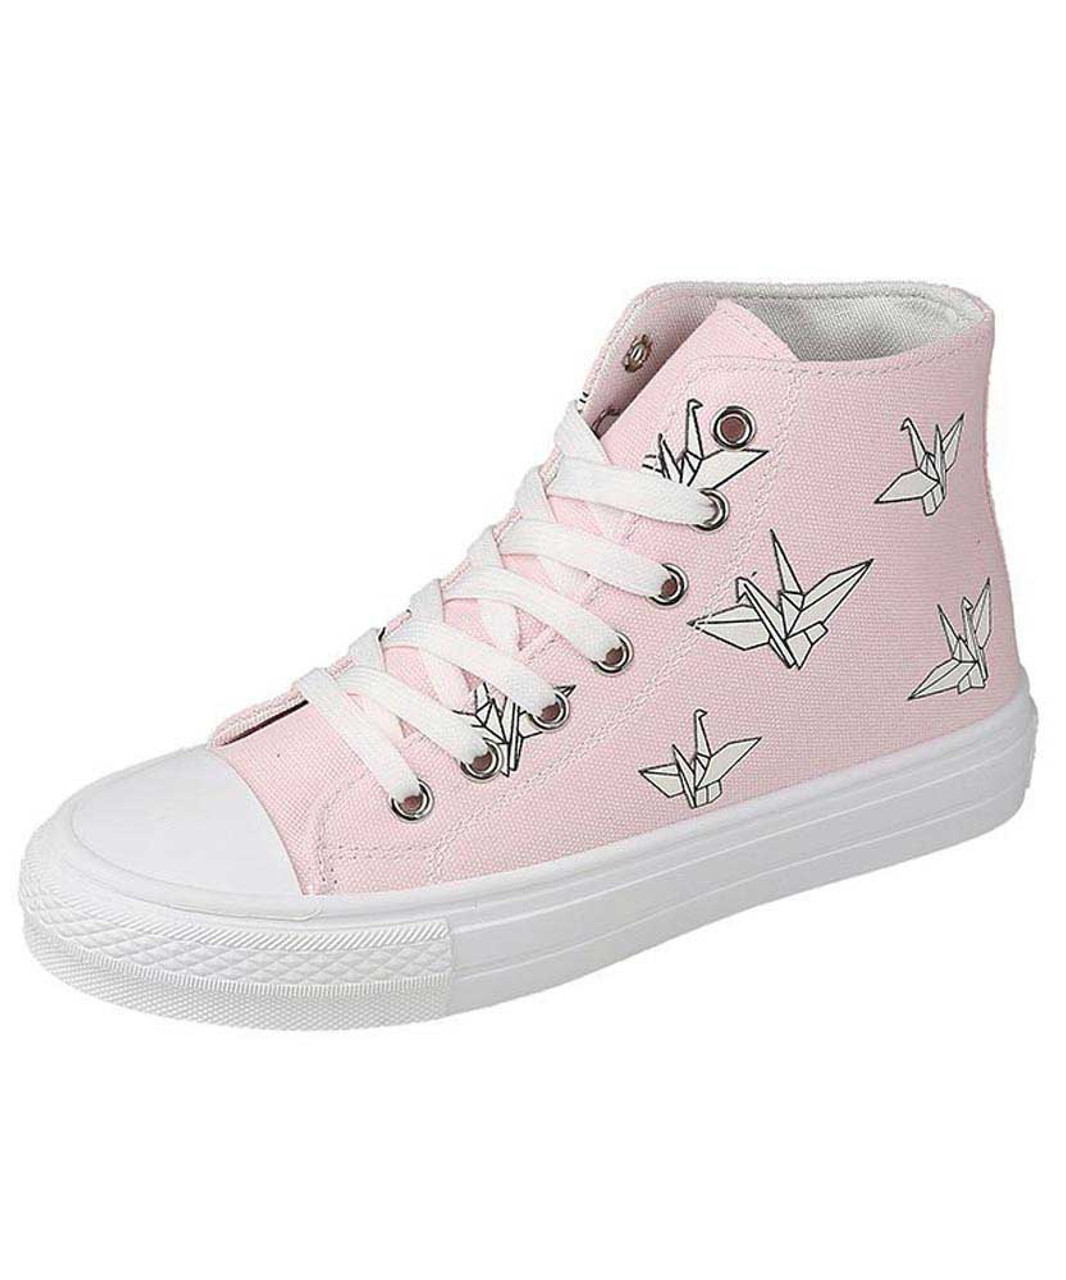 womens pink canvas sneakers